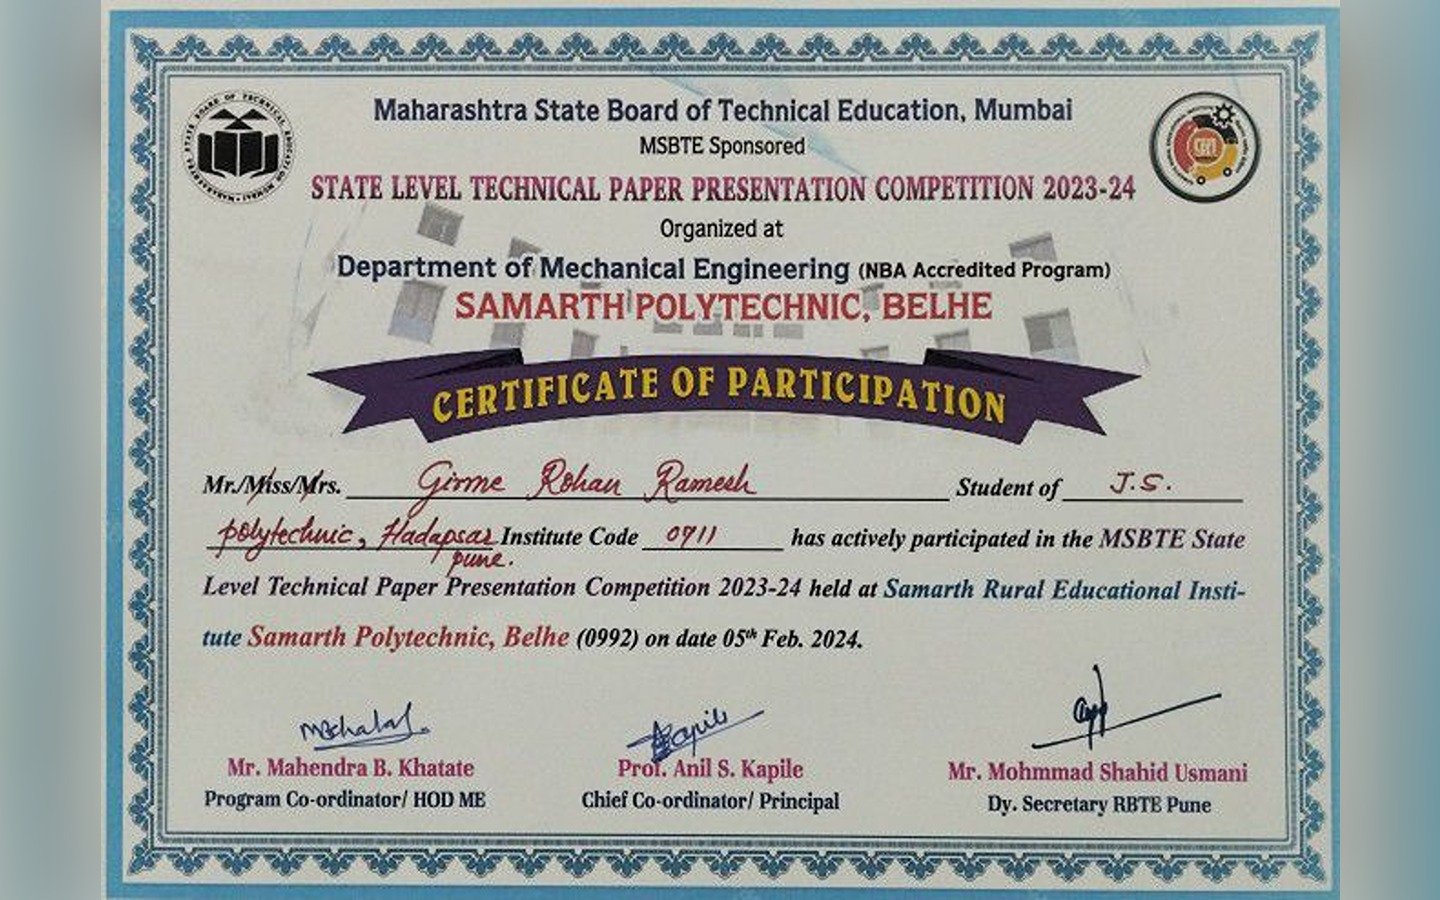 MSBTE Technical Paper Presentation Competition 2023-24